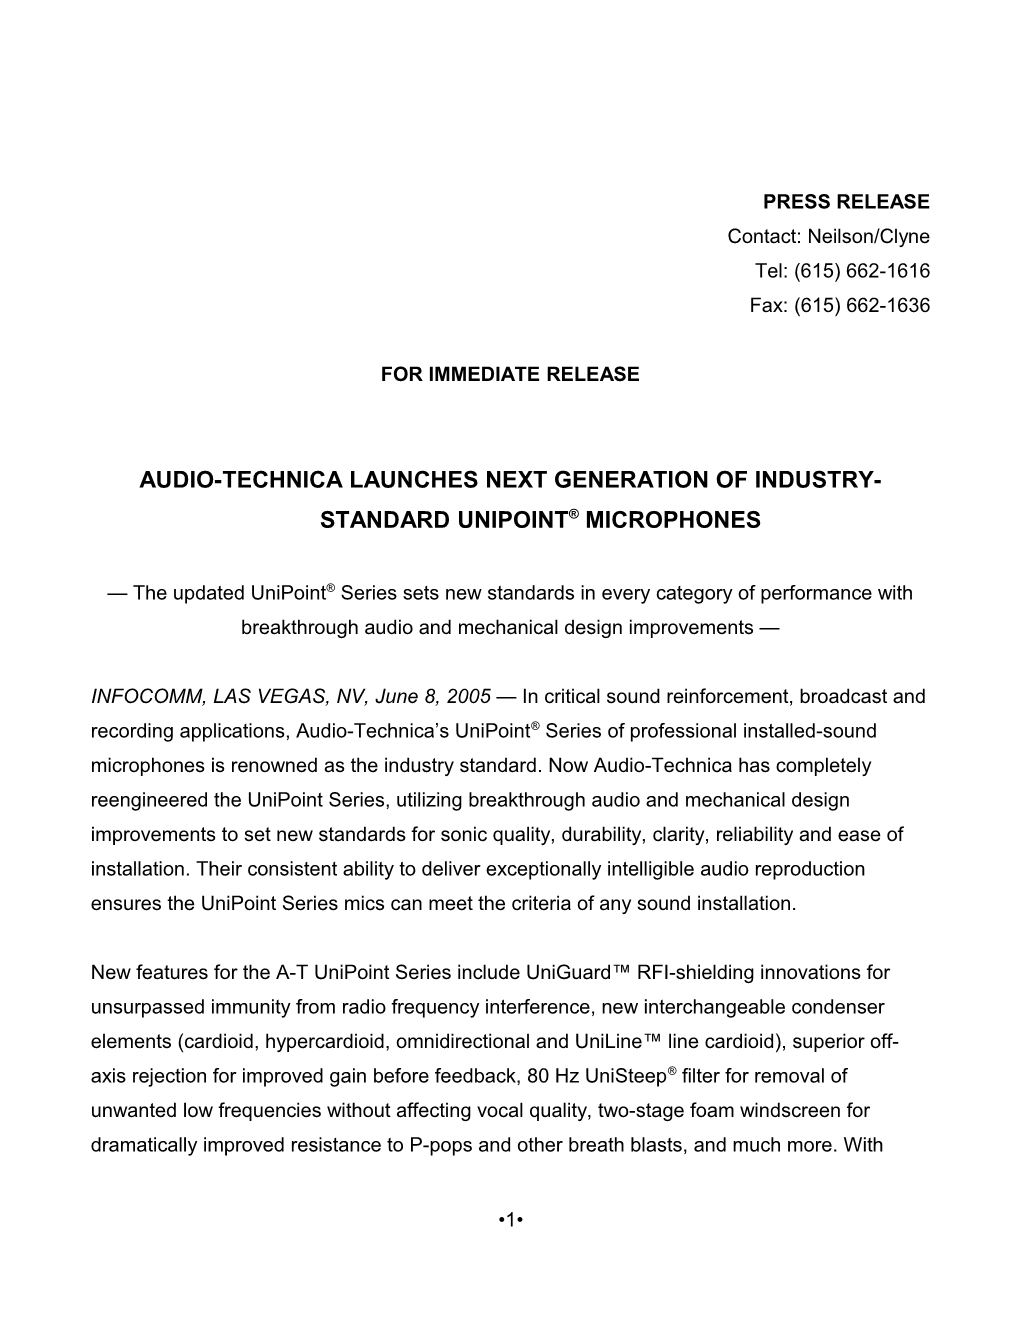 Audio-Technica Launches Next Generation of Industry-Standard Unipoint Microphones